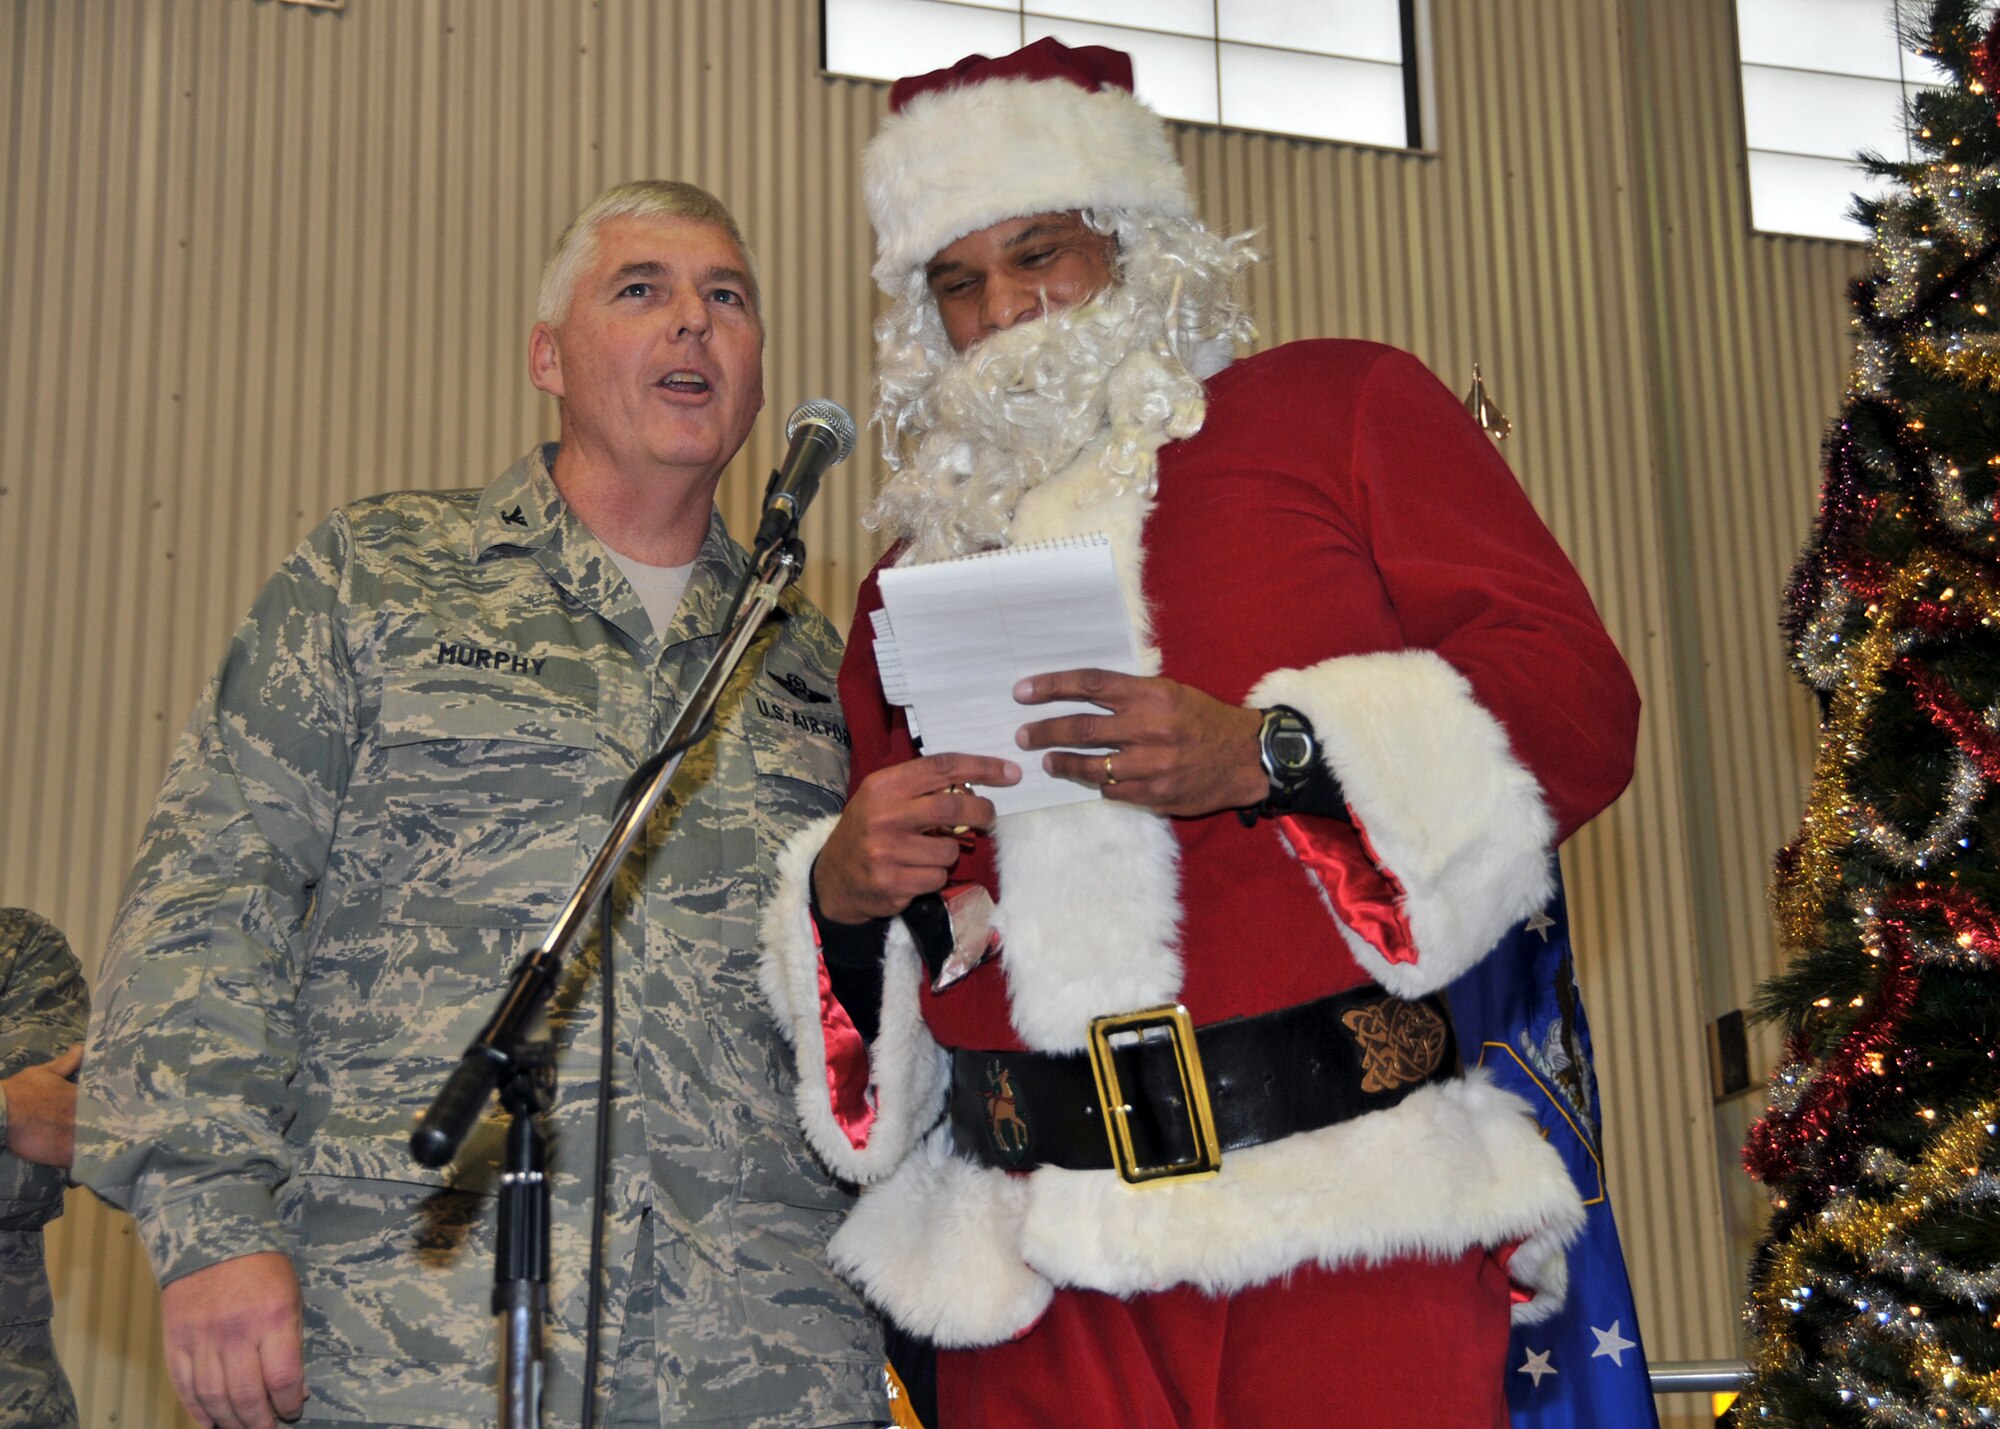 Santa Claus shares the stage with Col. Mark Murphy, acting 914th Airlift Wing commander during a visit to the Niagara Falls Air Reserve Station December 4, 2010 Niagara Falls NY. Mr. Claus read aloud from his naughty or nice list to members of the 914th Airlift Wing during their Holiday part. (U.S. Air Force photo by Staff Sgt. Joseph McKee)